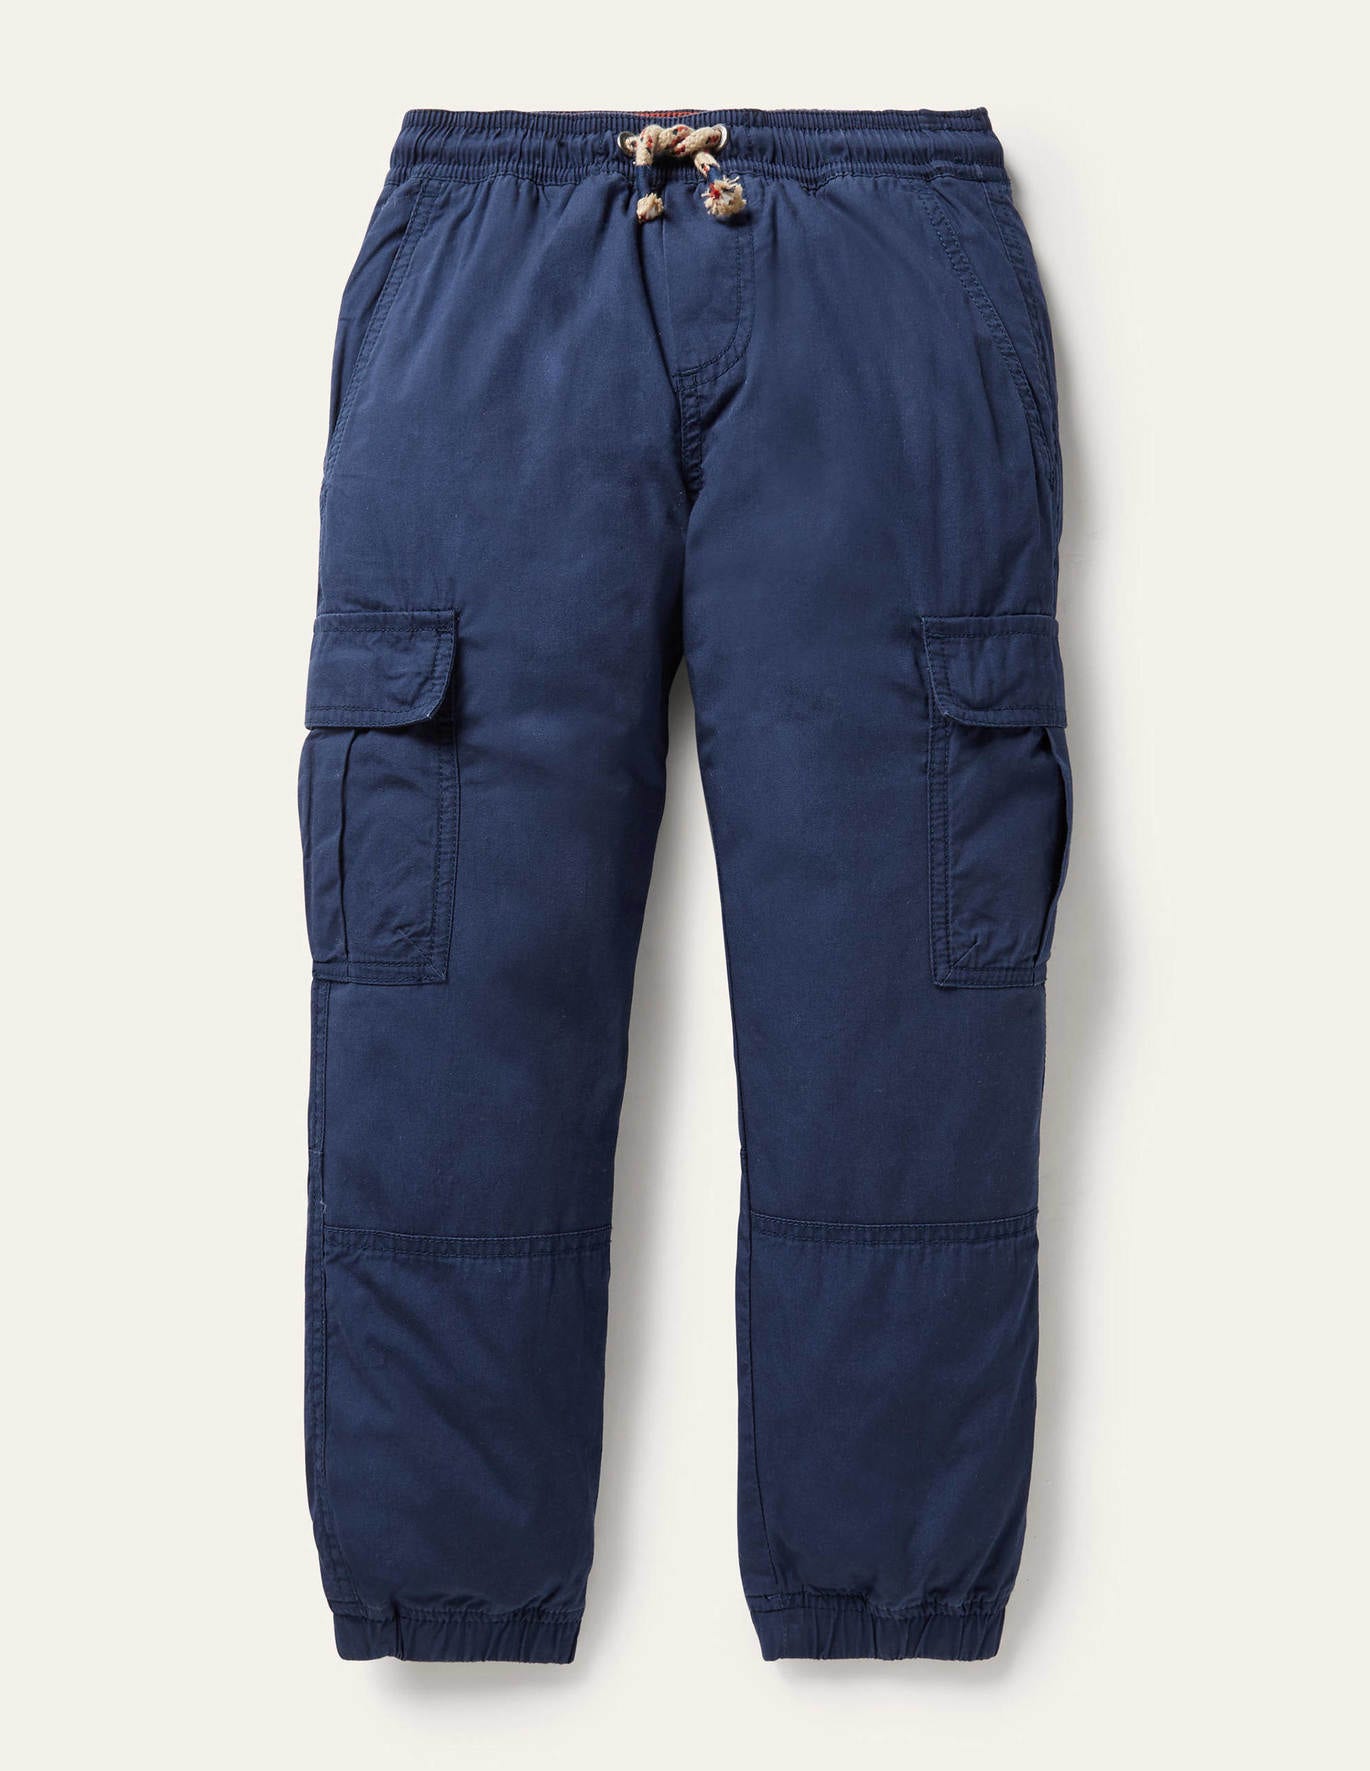 Boden Lined Utility Cargo Pants - College Navy